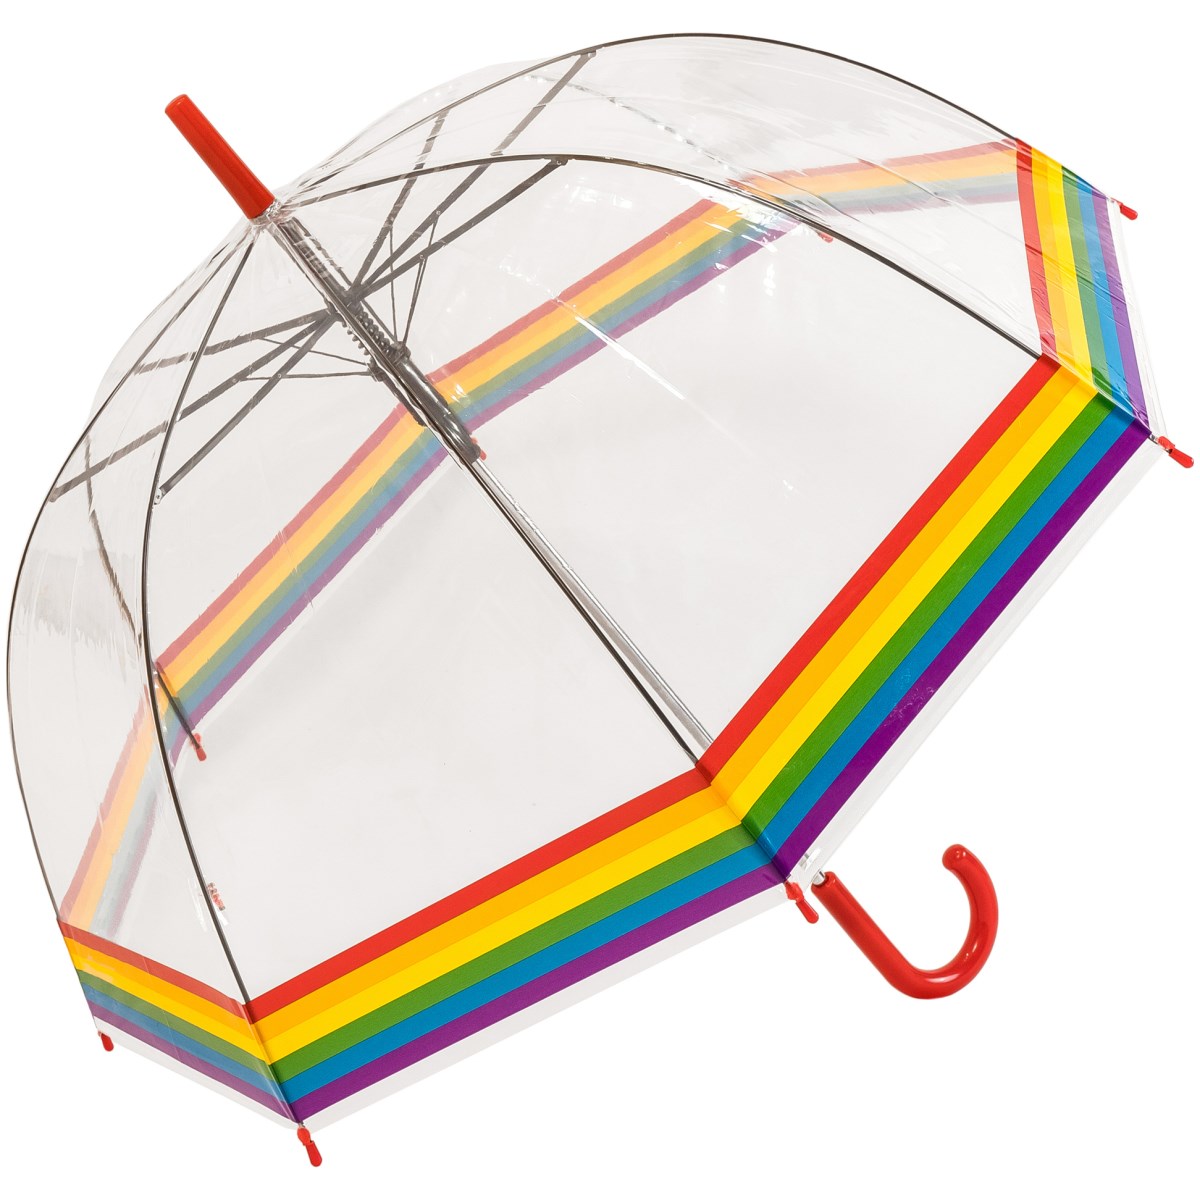 Rainbow Border Clear Dome Umbrella - Adult size - Red Handle (18022-R)